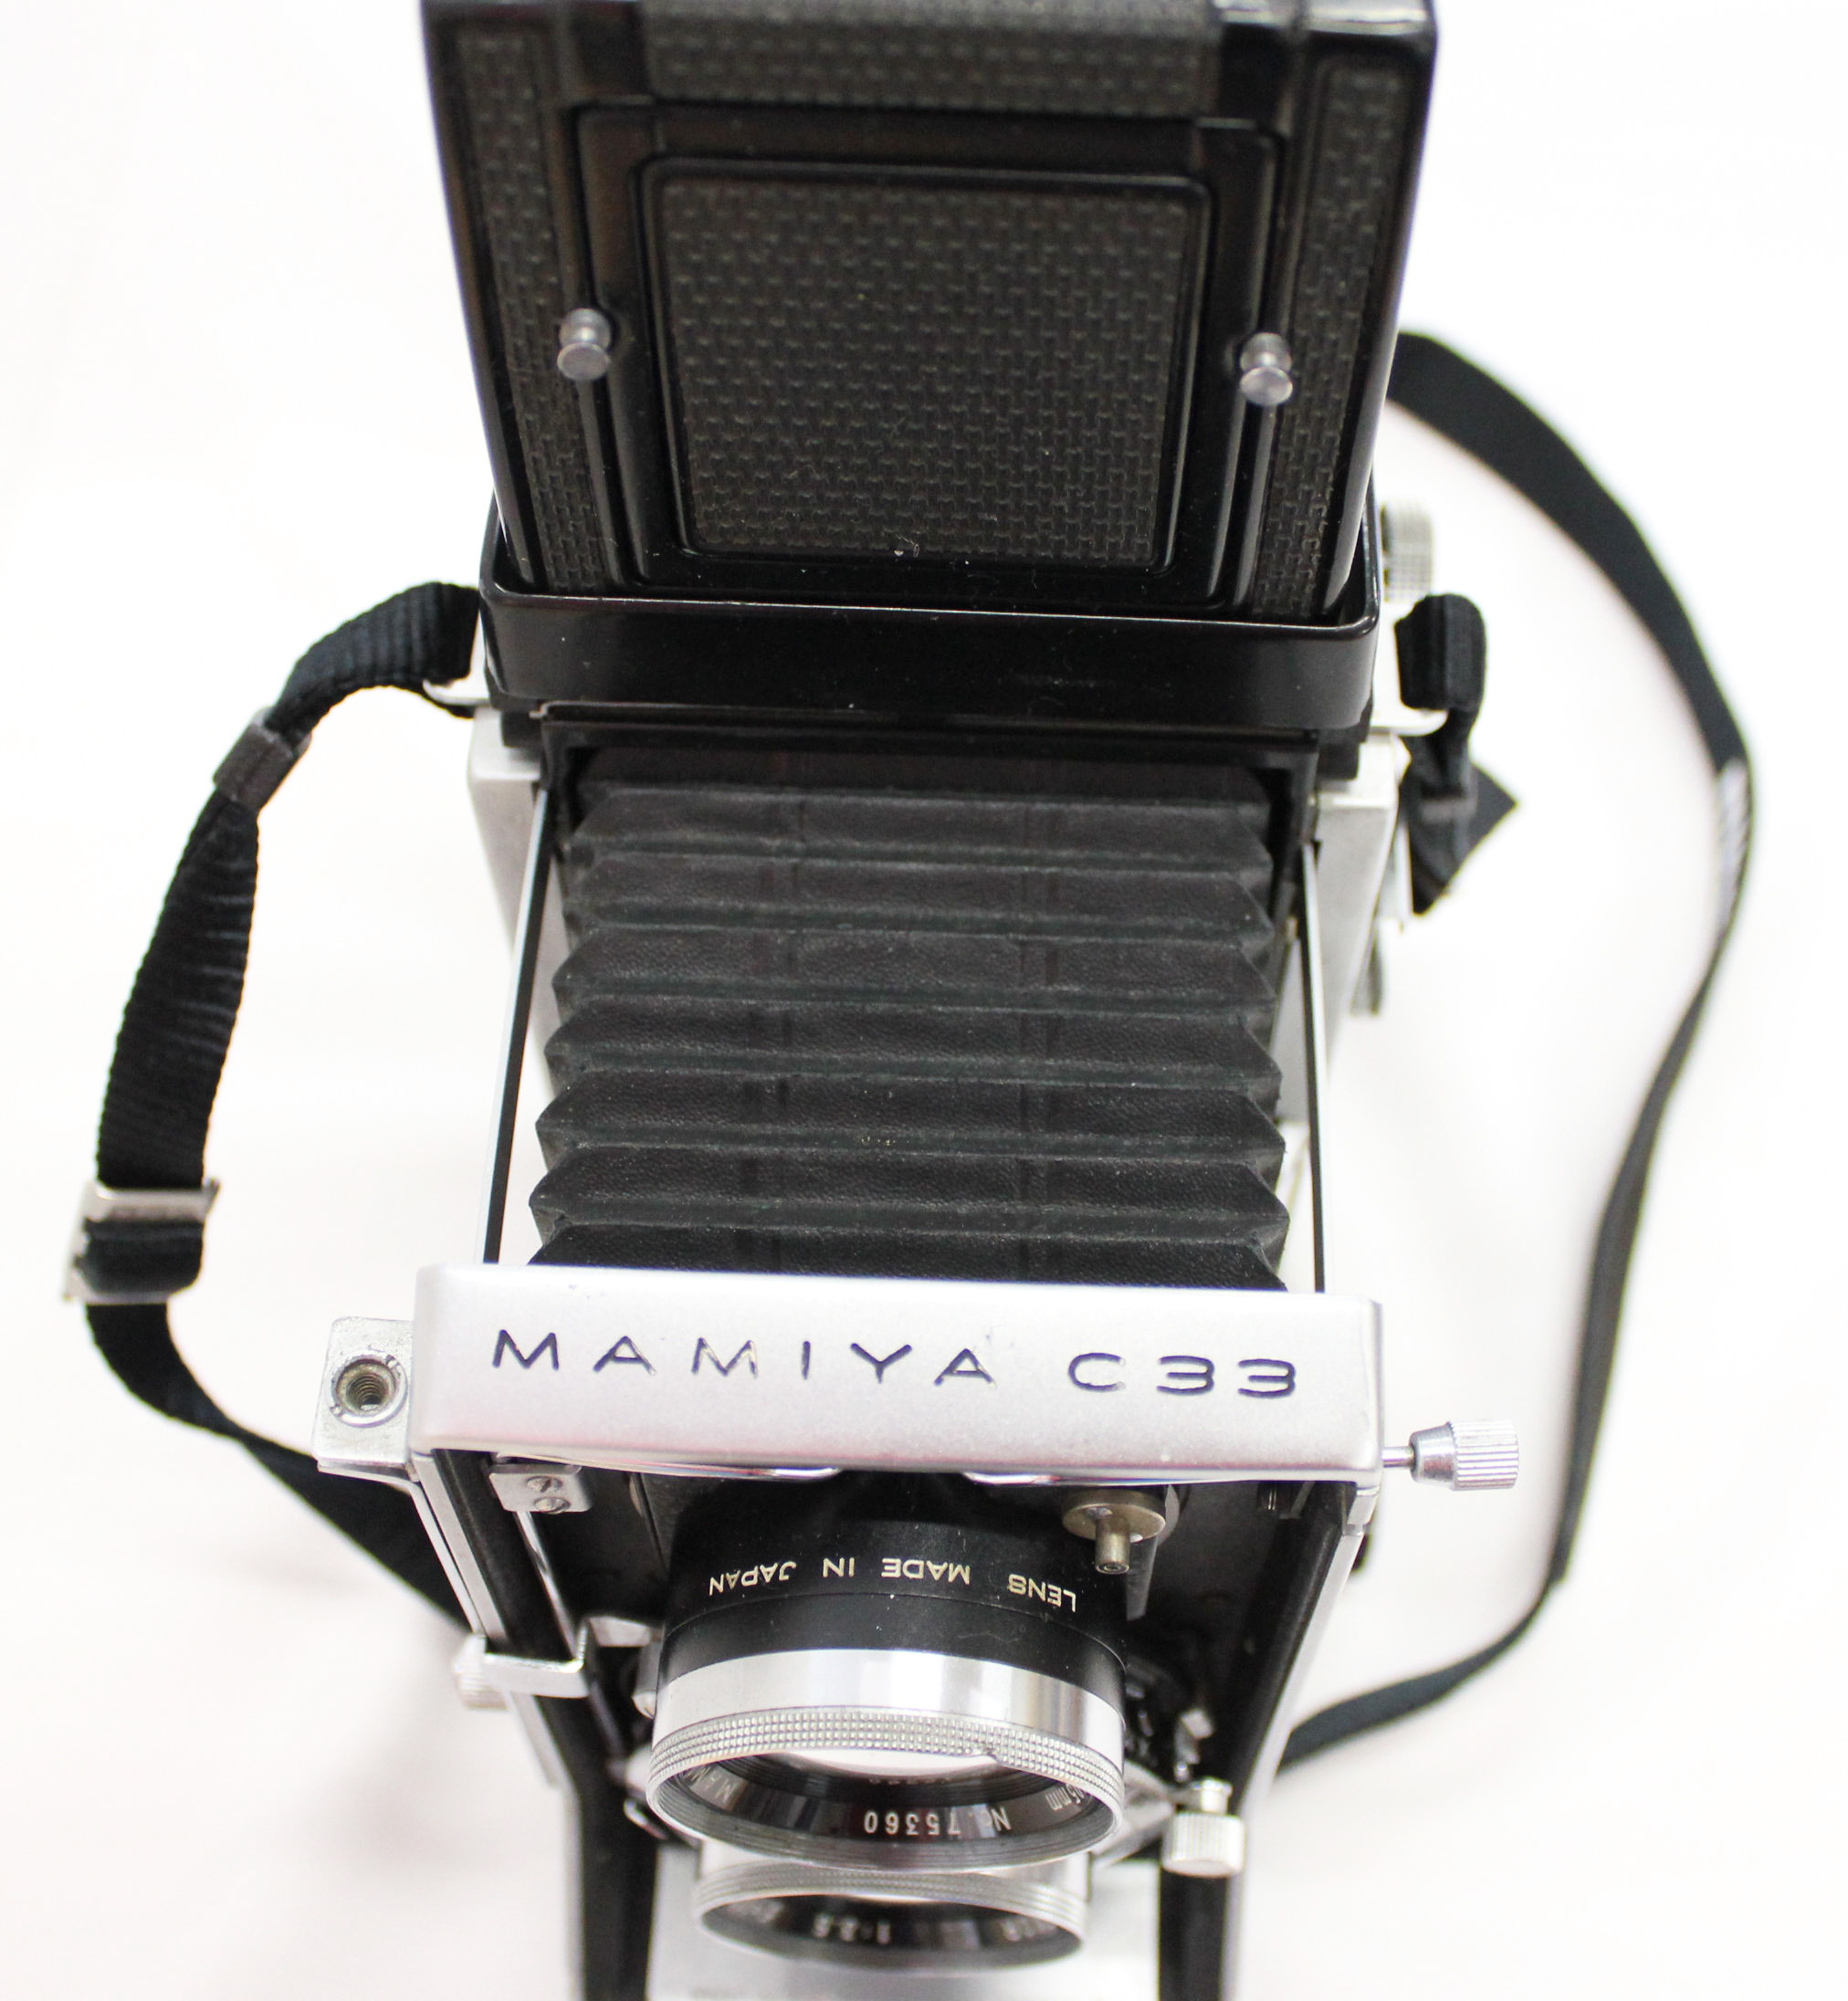  Mamiya C33 Professional Medium Format TLR with 105mm F/3.5 Lens from Japan Photo 5